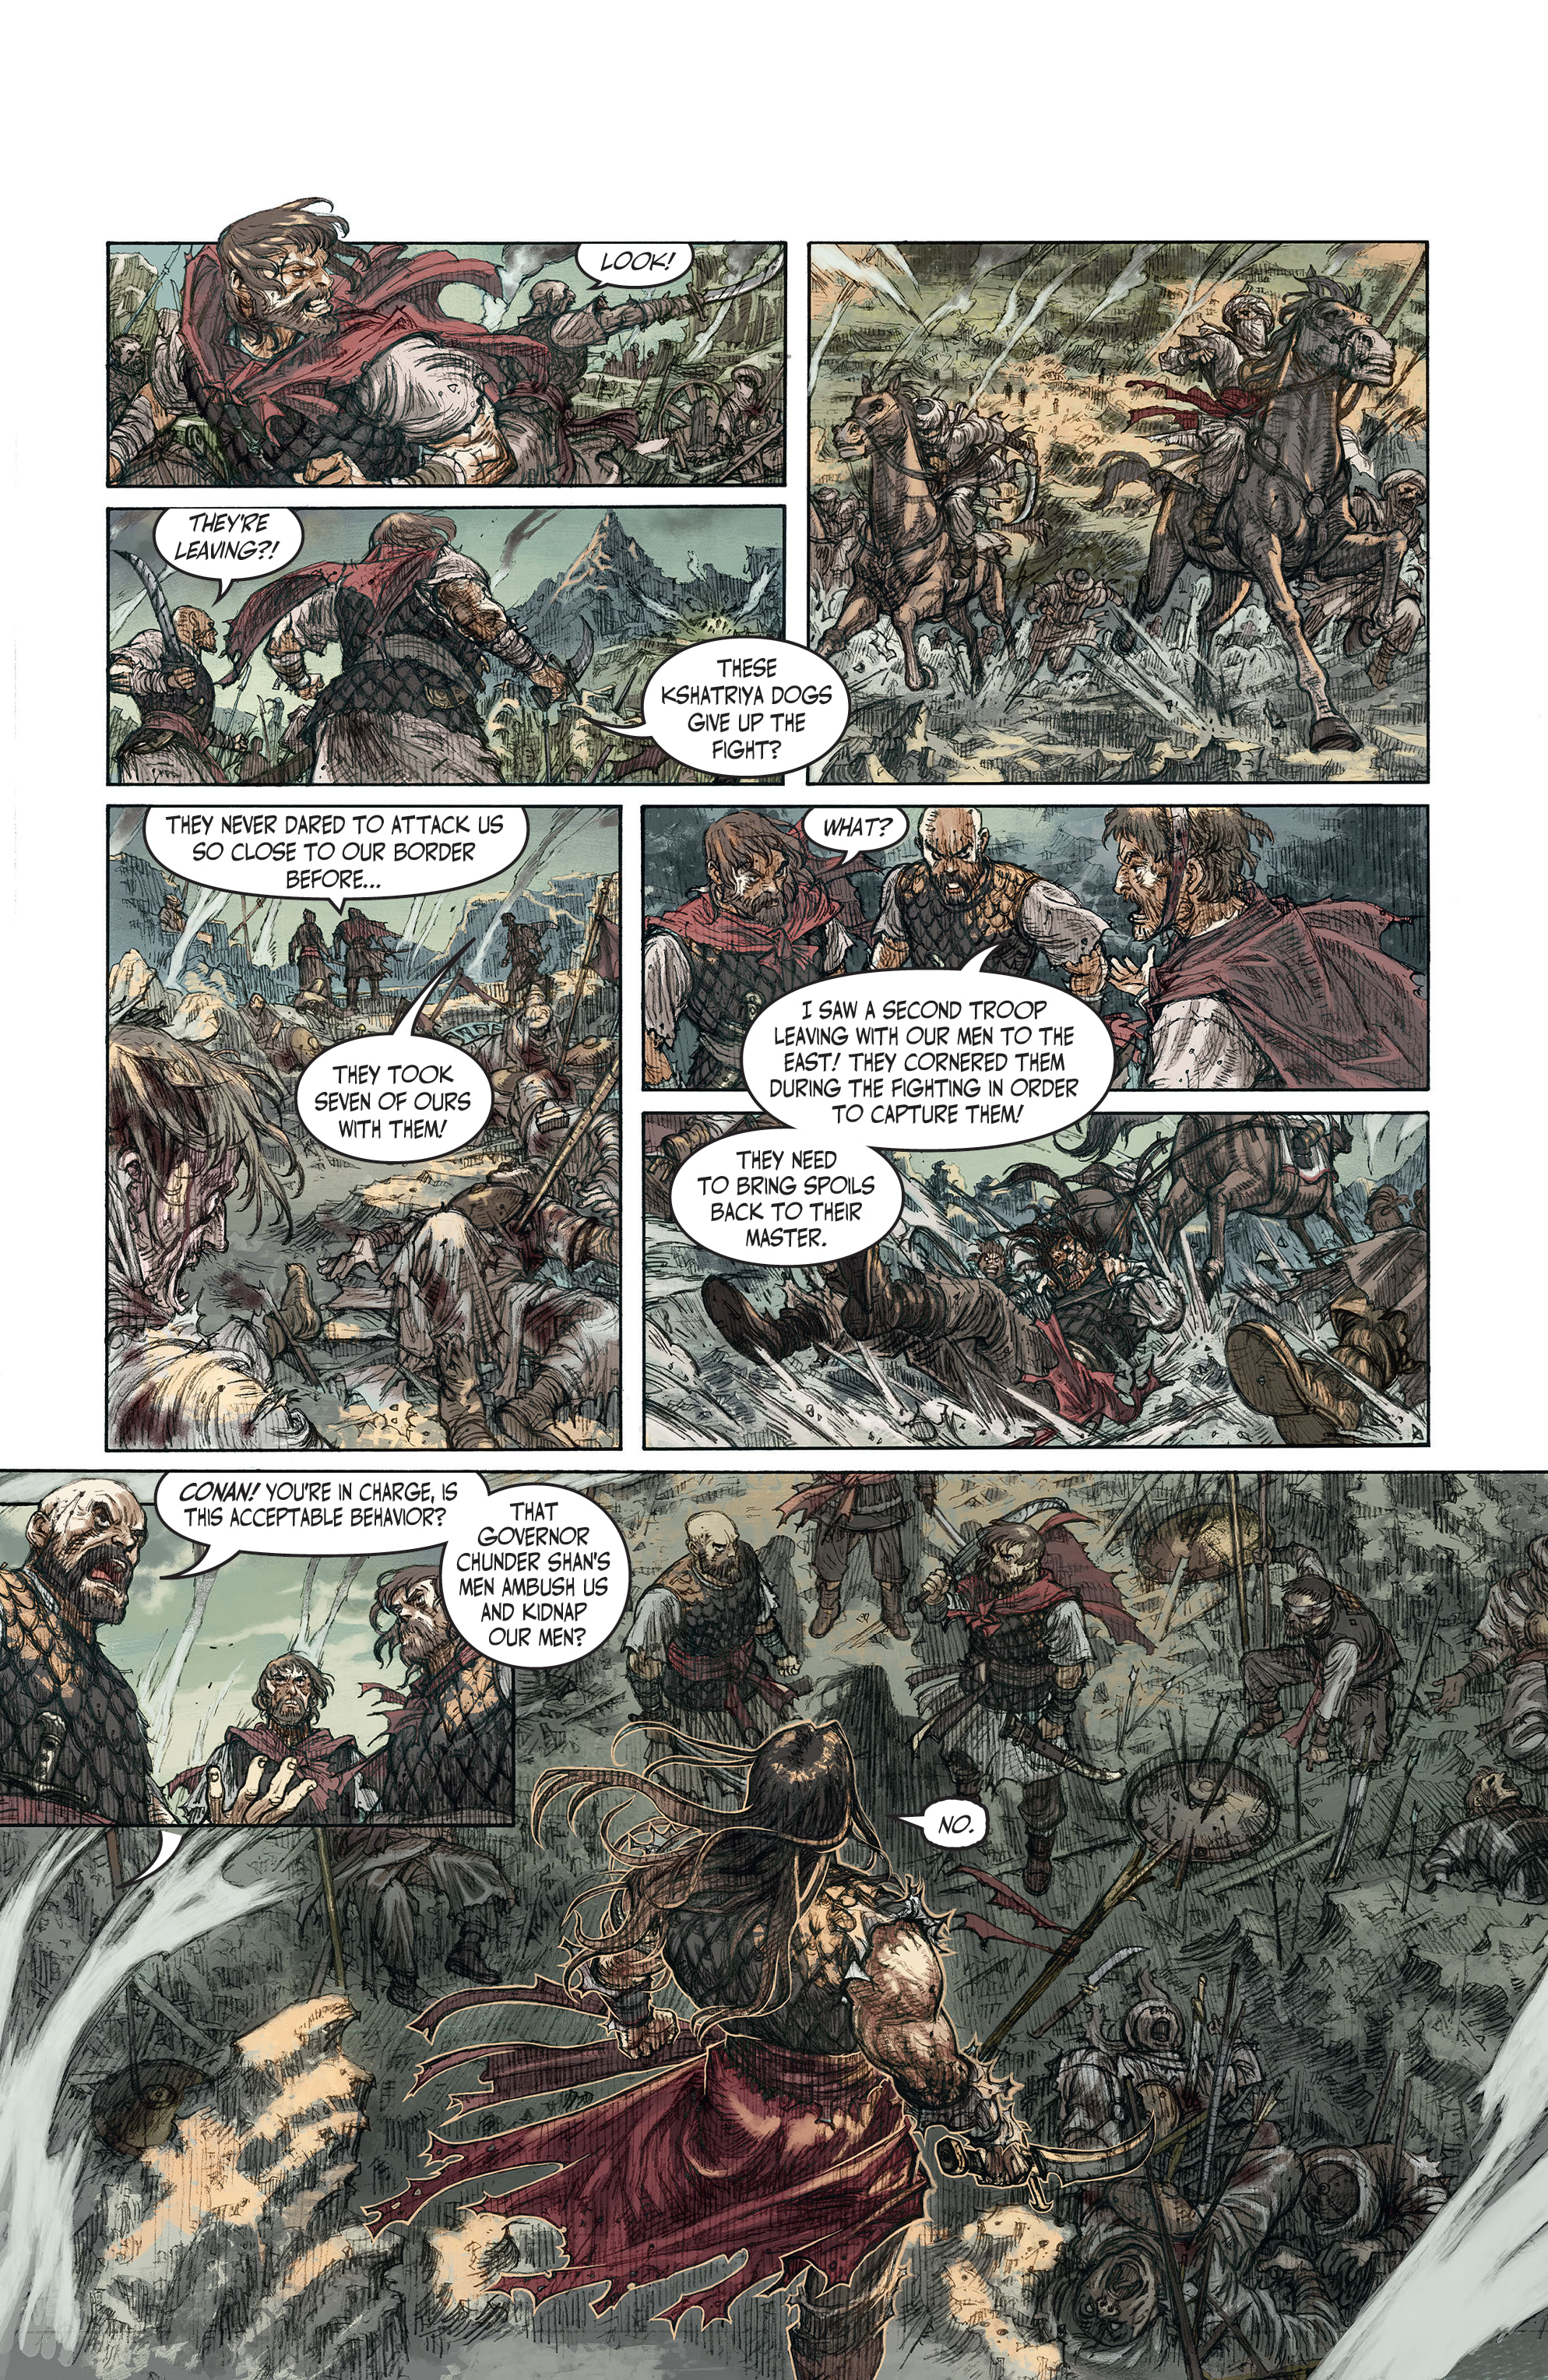 The Cimmerian: People of the Black Circle (2020-): Chapter 1 - Page 4